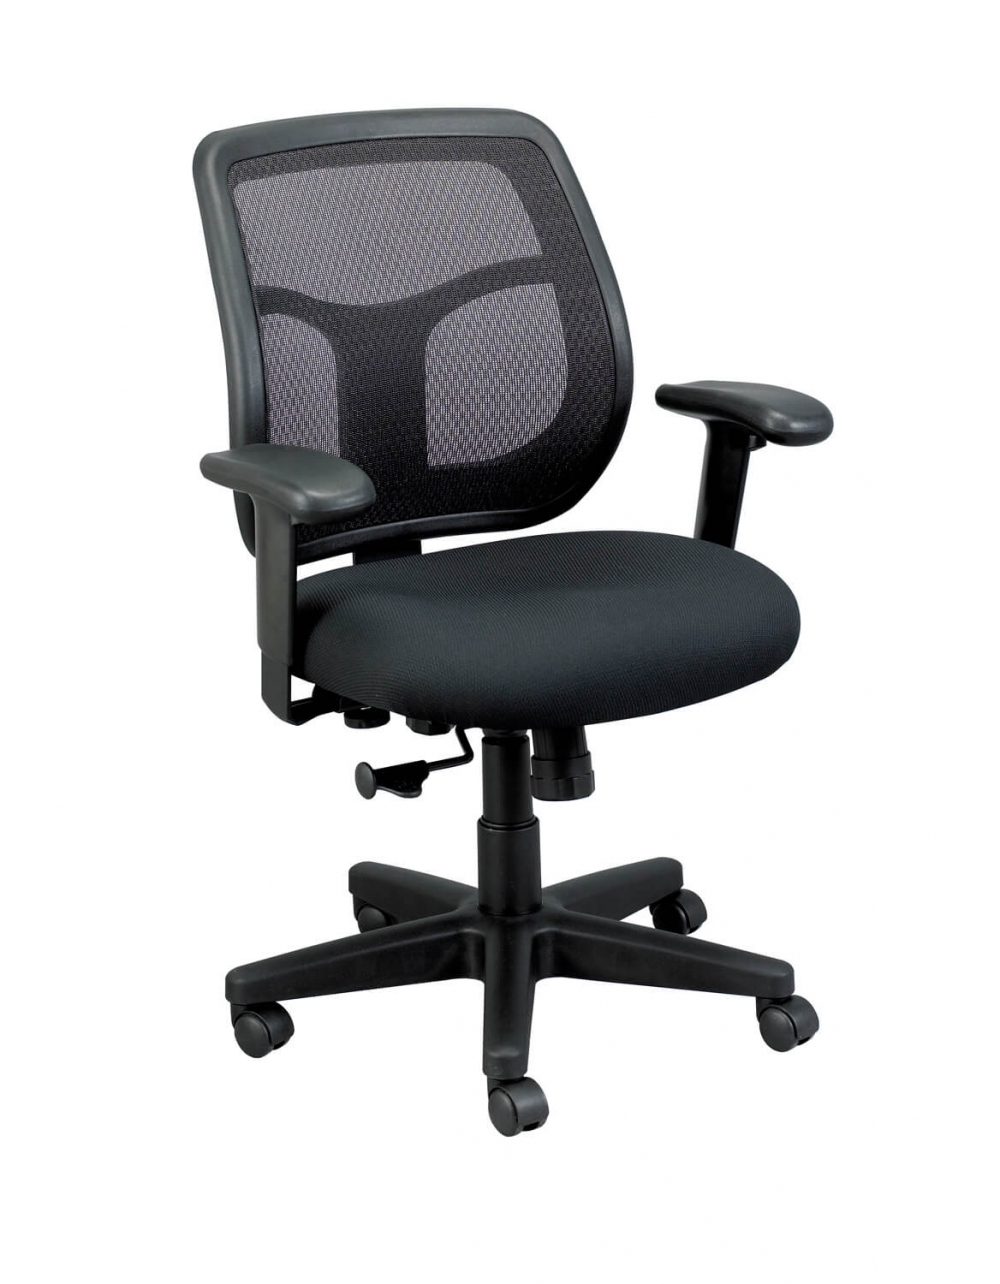 office-furniture-chairs-office-task-chair.jpg